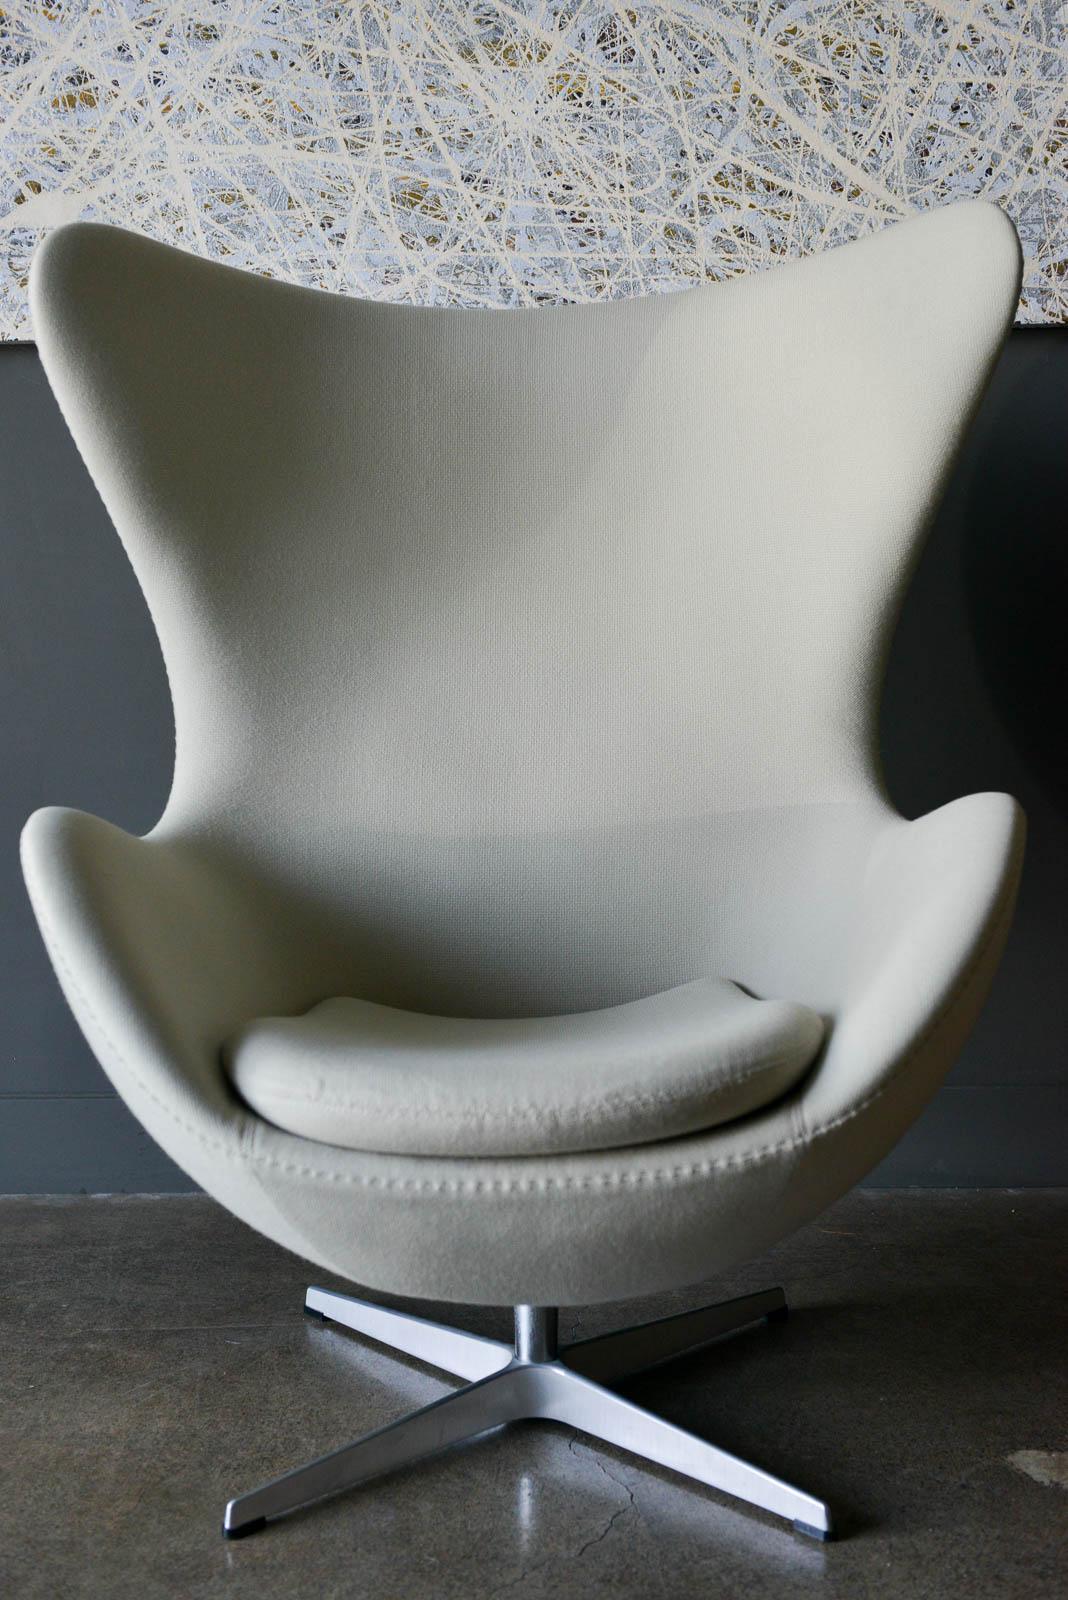 Original Arne Jacobsen for Fritz Hansen egg chair with desirable reclining mechanism. Originally designed in 1958, this is a 2008 production model. Beautiful neutral beige fabric in very good original condition with Hallingdal fabric. Base is